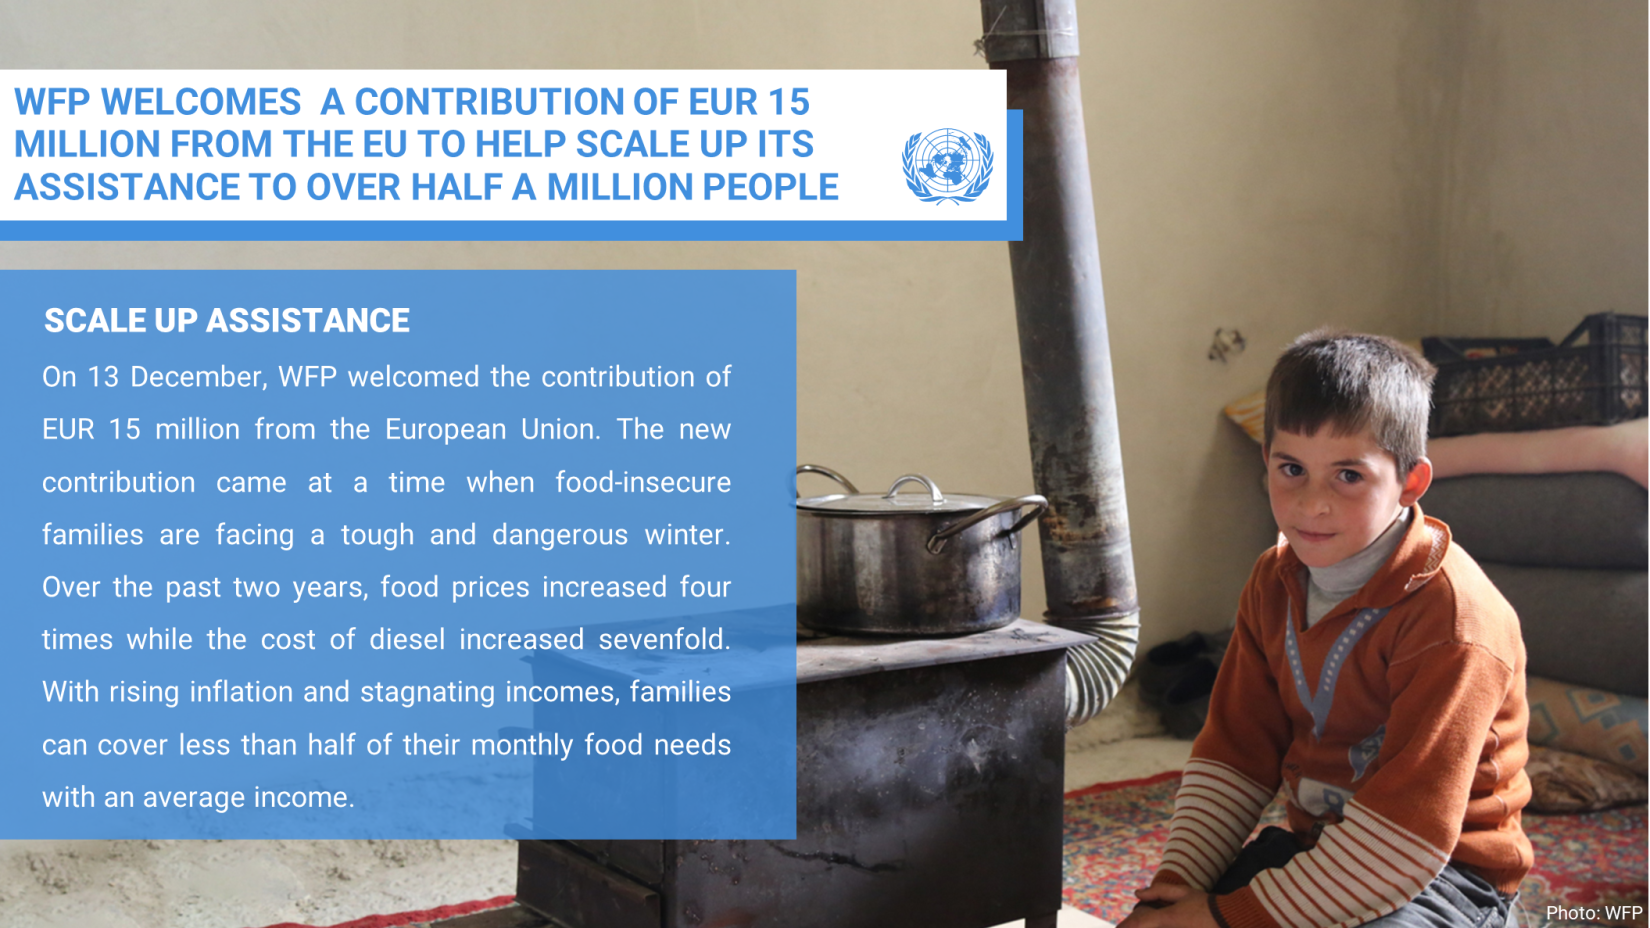 WFP WELCOMES A CONTRIBUTION OF EUR 15 MILLION FROM THE EU TO HELP SCALE UP ITS ASSISTANCE TO OVER HALF A MILLION PEOPLE IN URGENT NEED OF FOOD ASSISTANCE ACROSS SYRIA